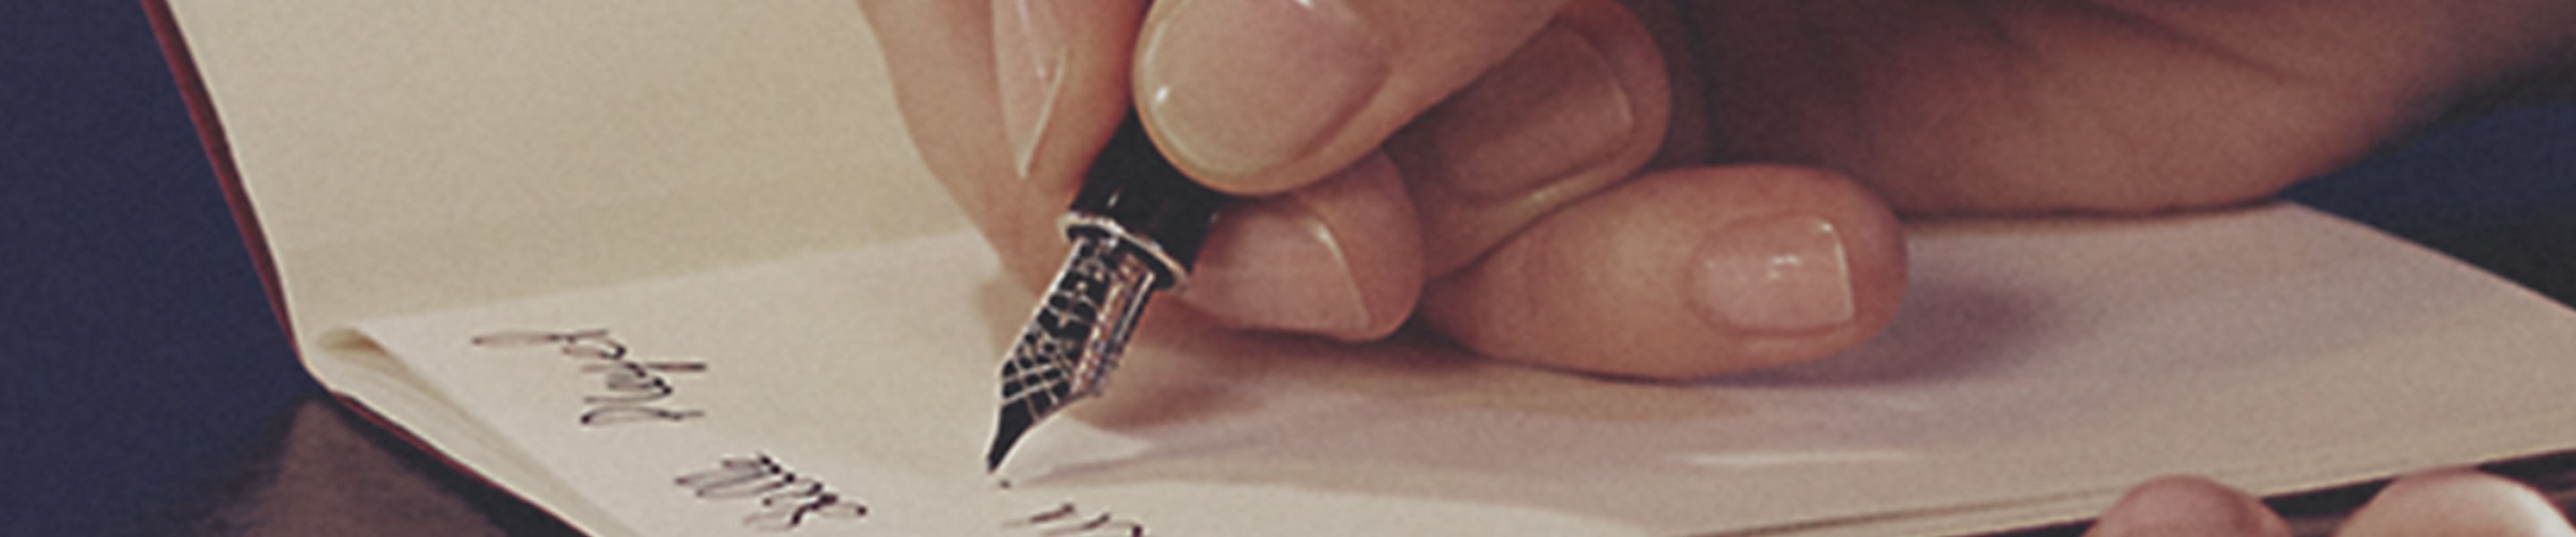 Closeup of a hand using a fountain pen to write in a notebook.